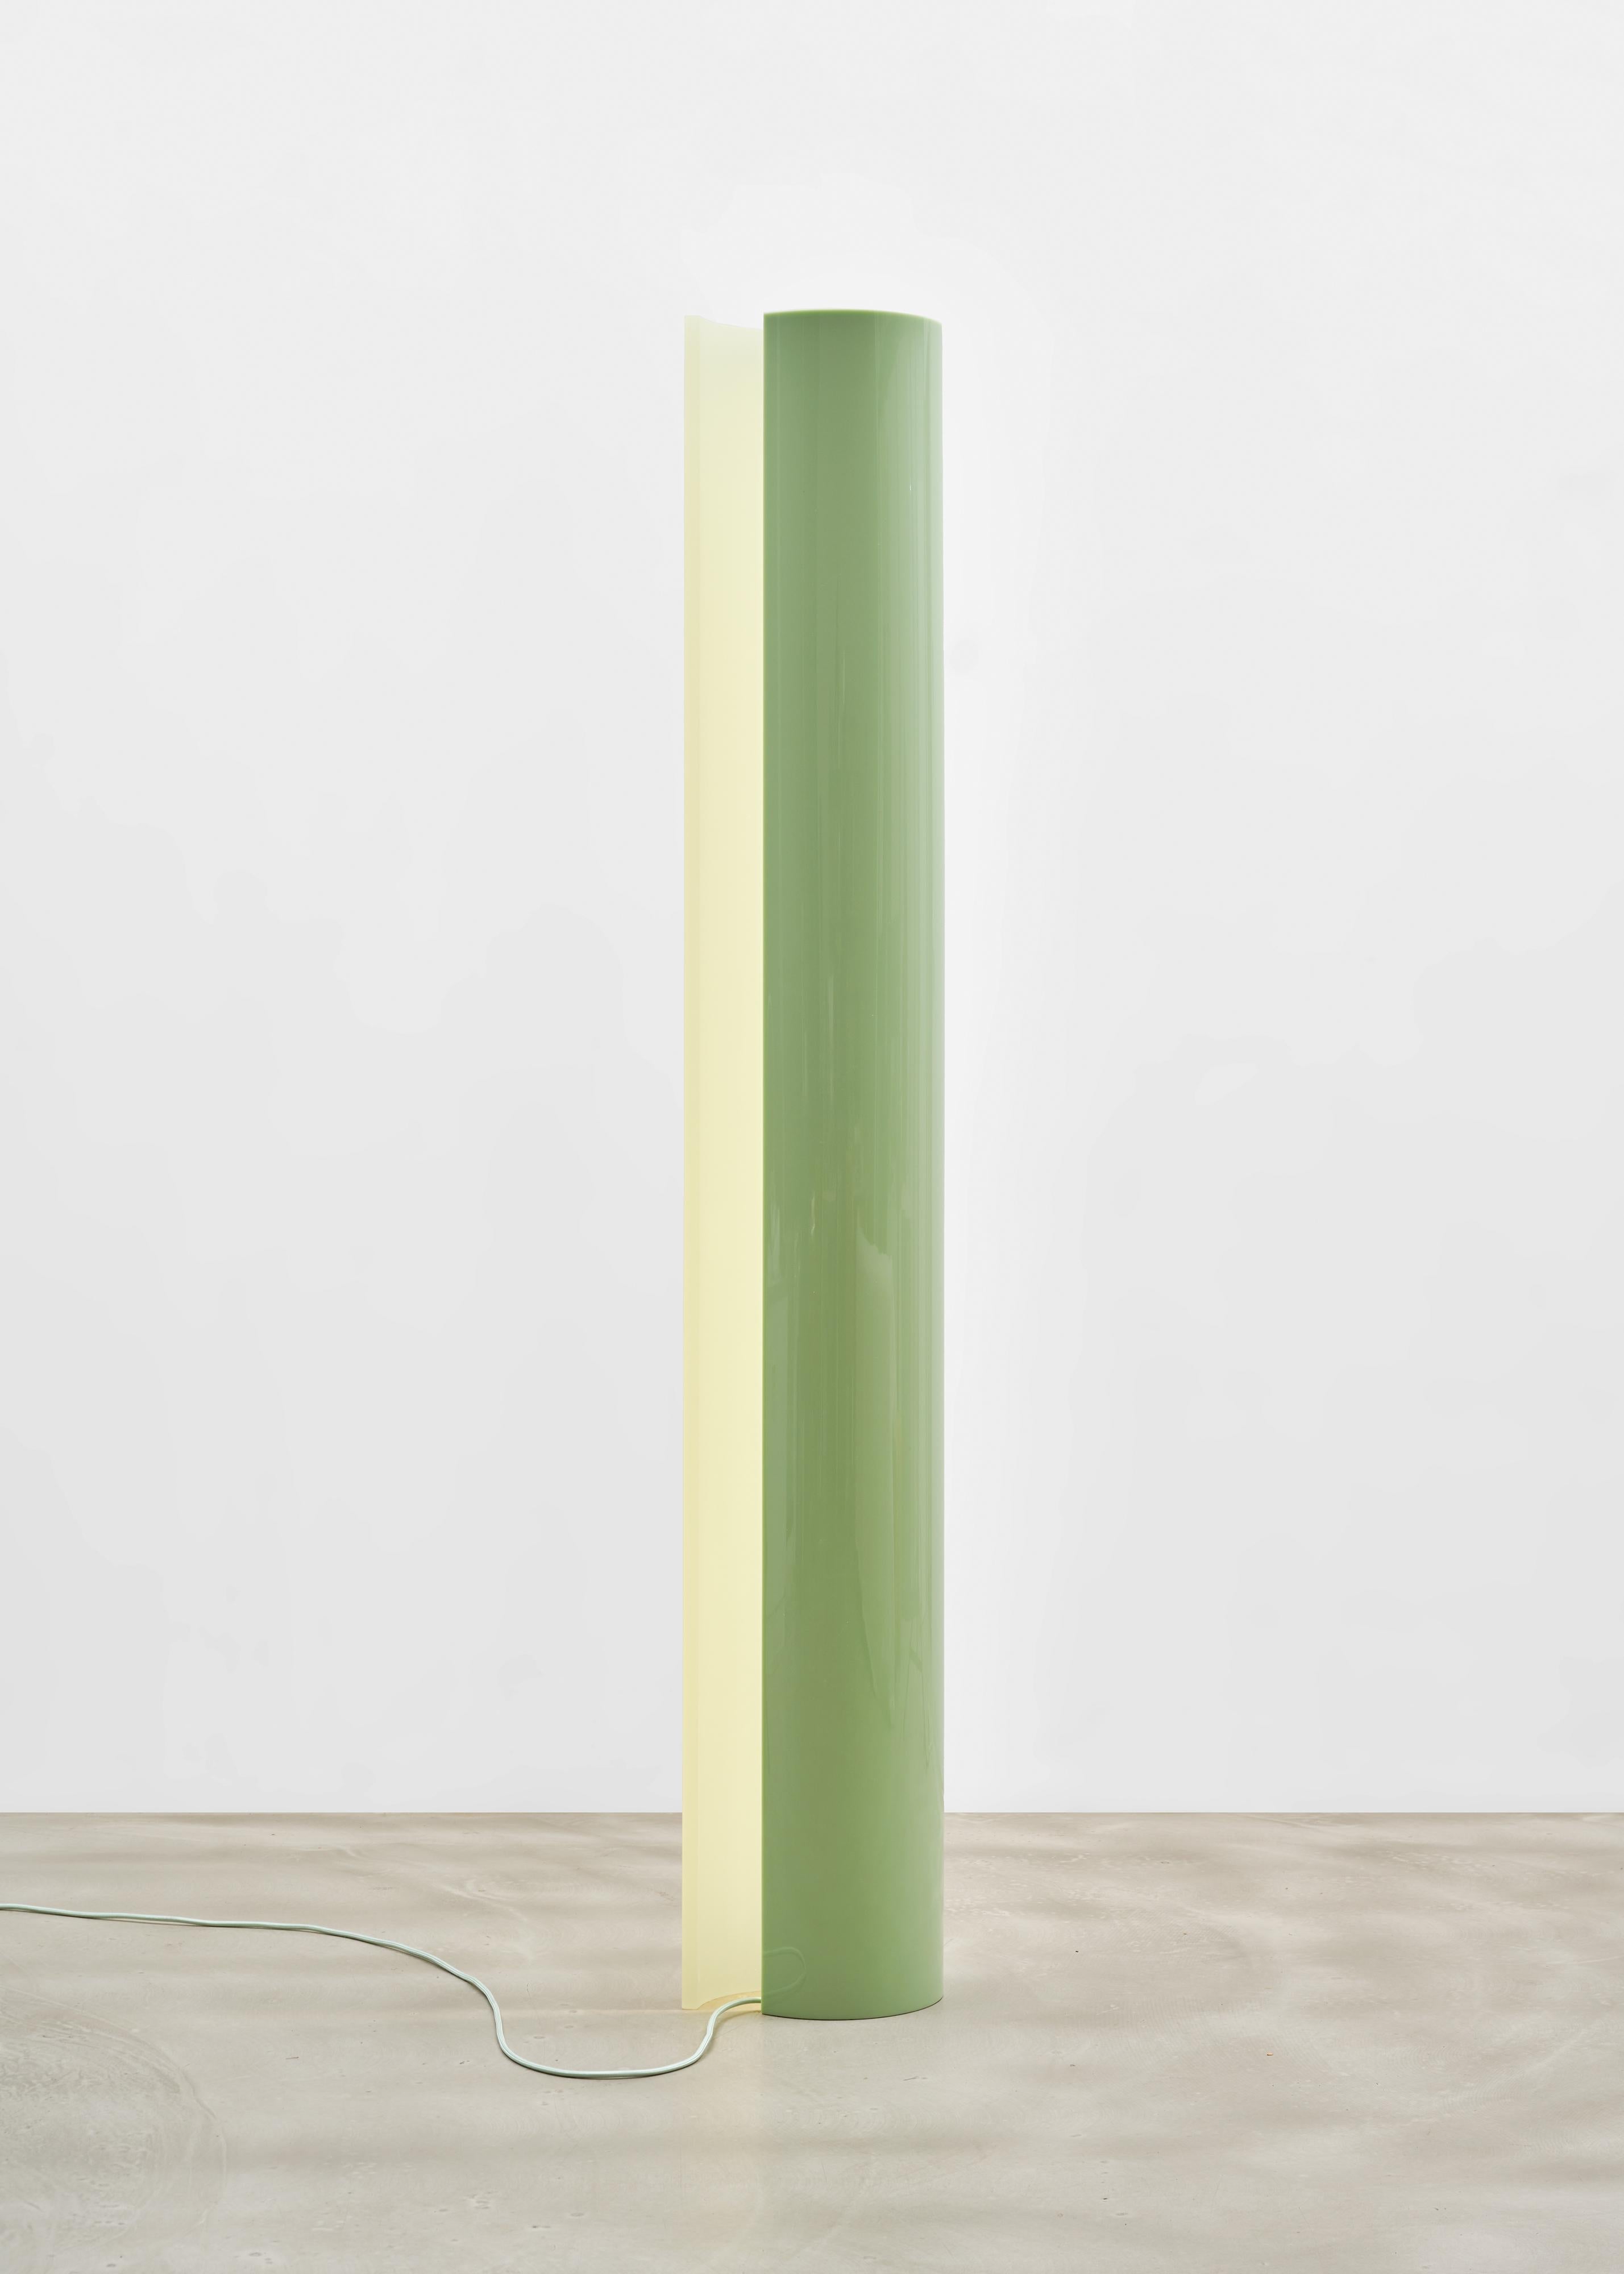 Resin Contemporary Floor Lamp, Curve Light by Sabine Marcelis, Green For Sale